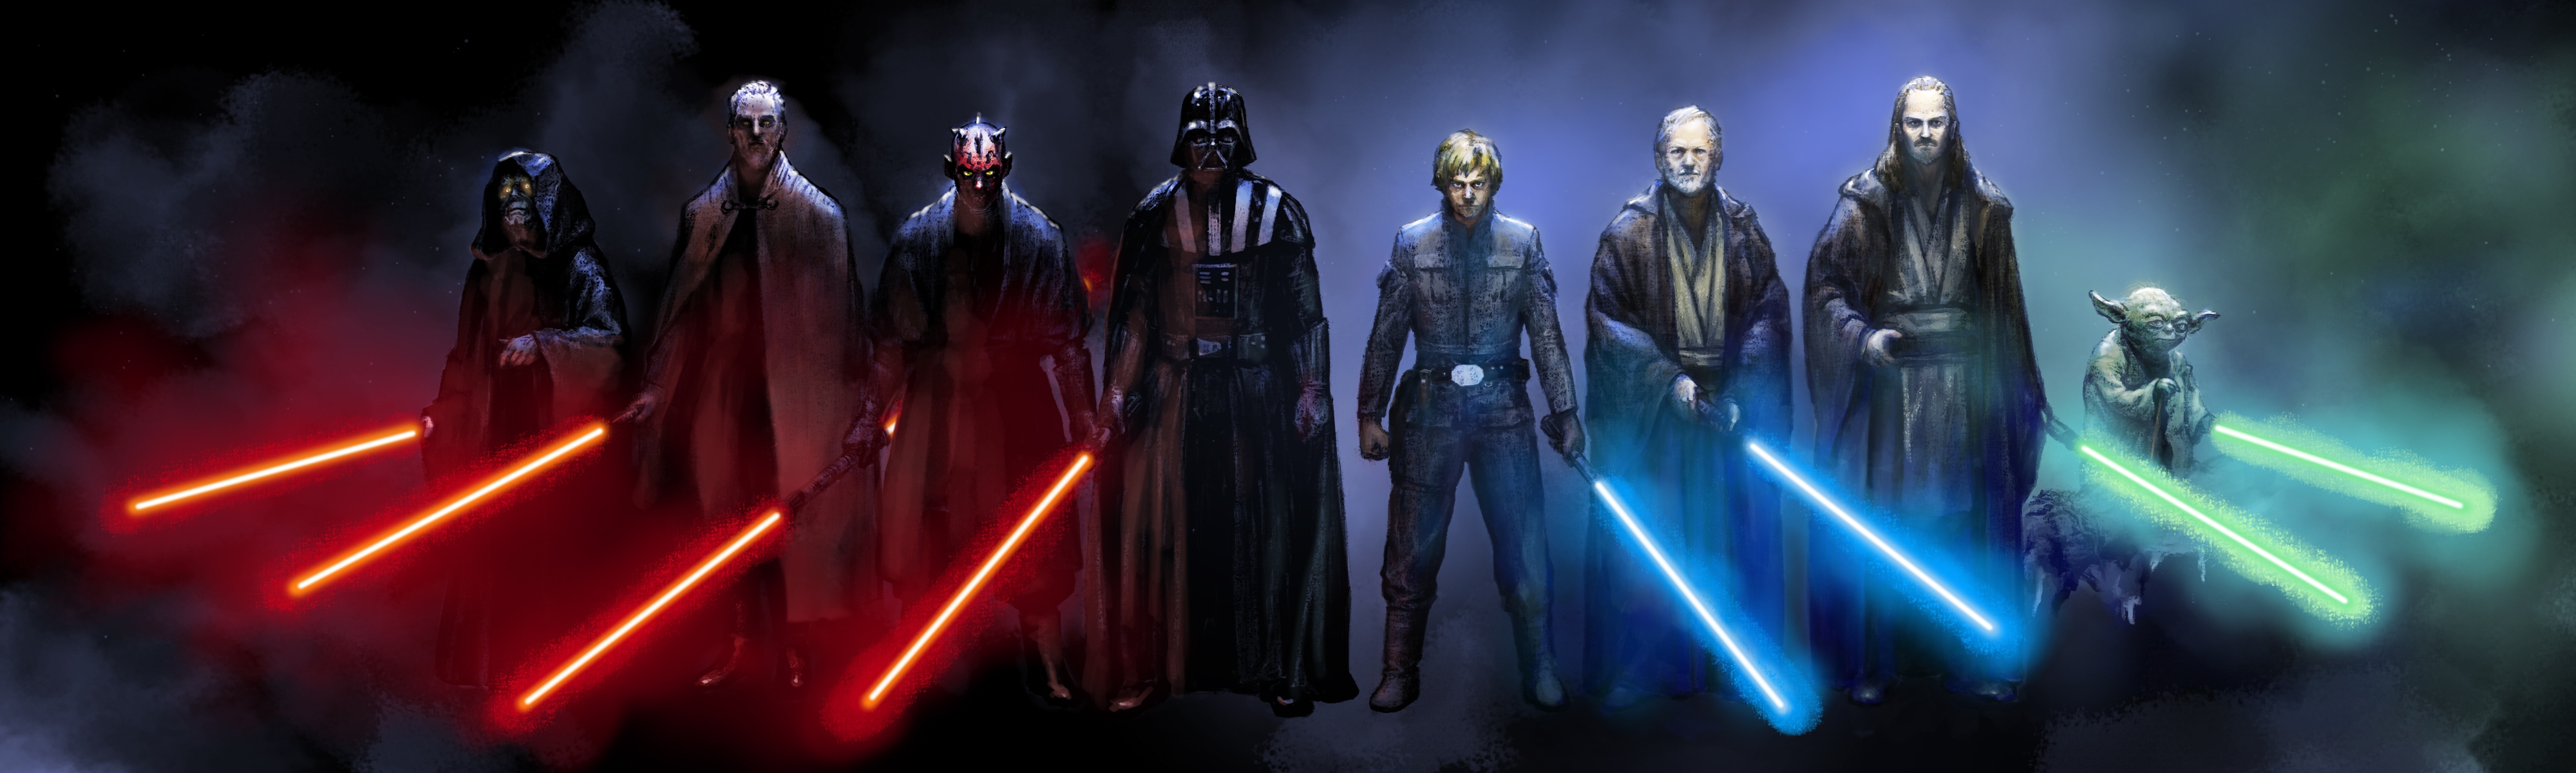 Star Wars Jedi Vs Sith Wallpapers The Art Mad Wallpapers 4000x1200